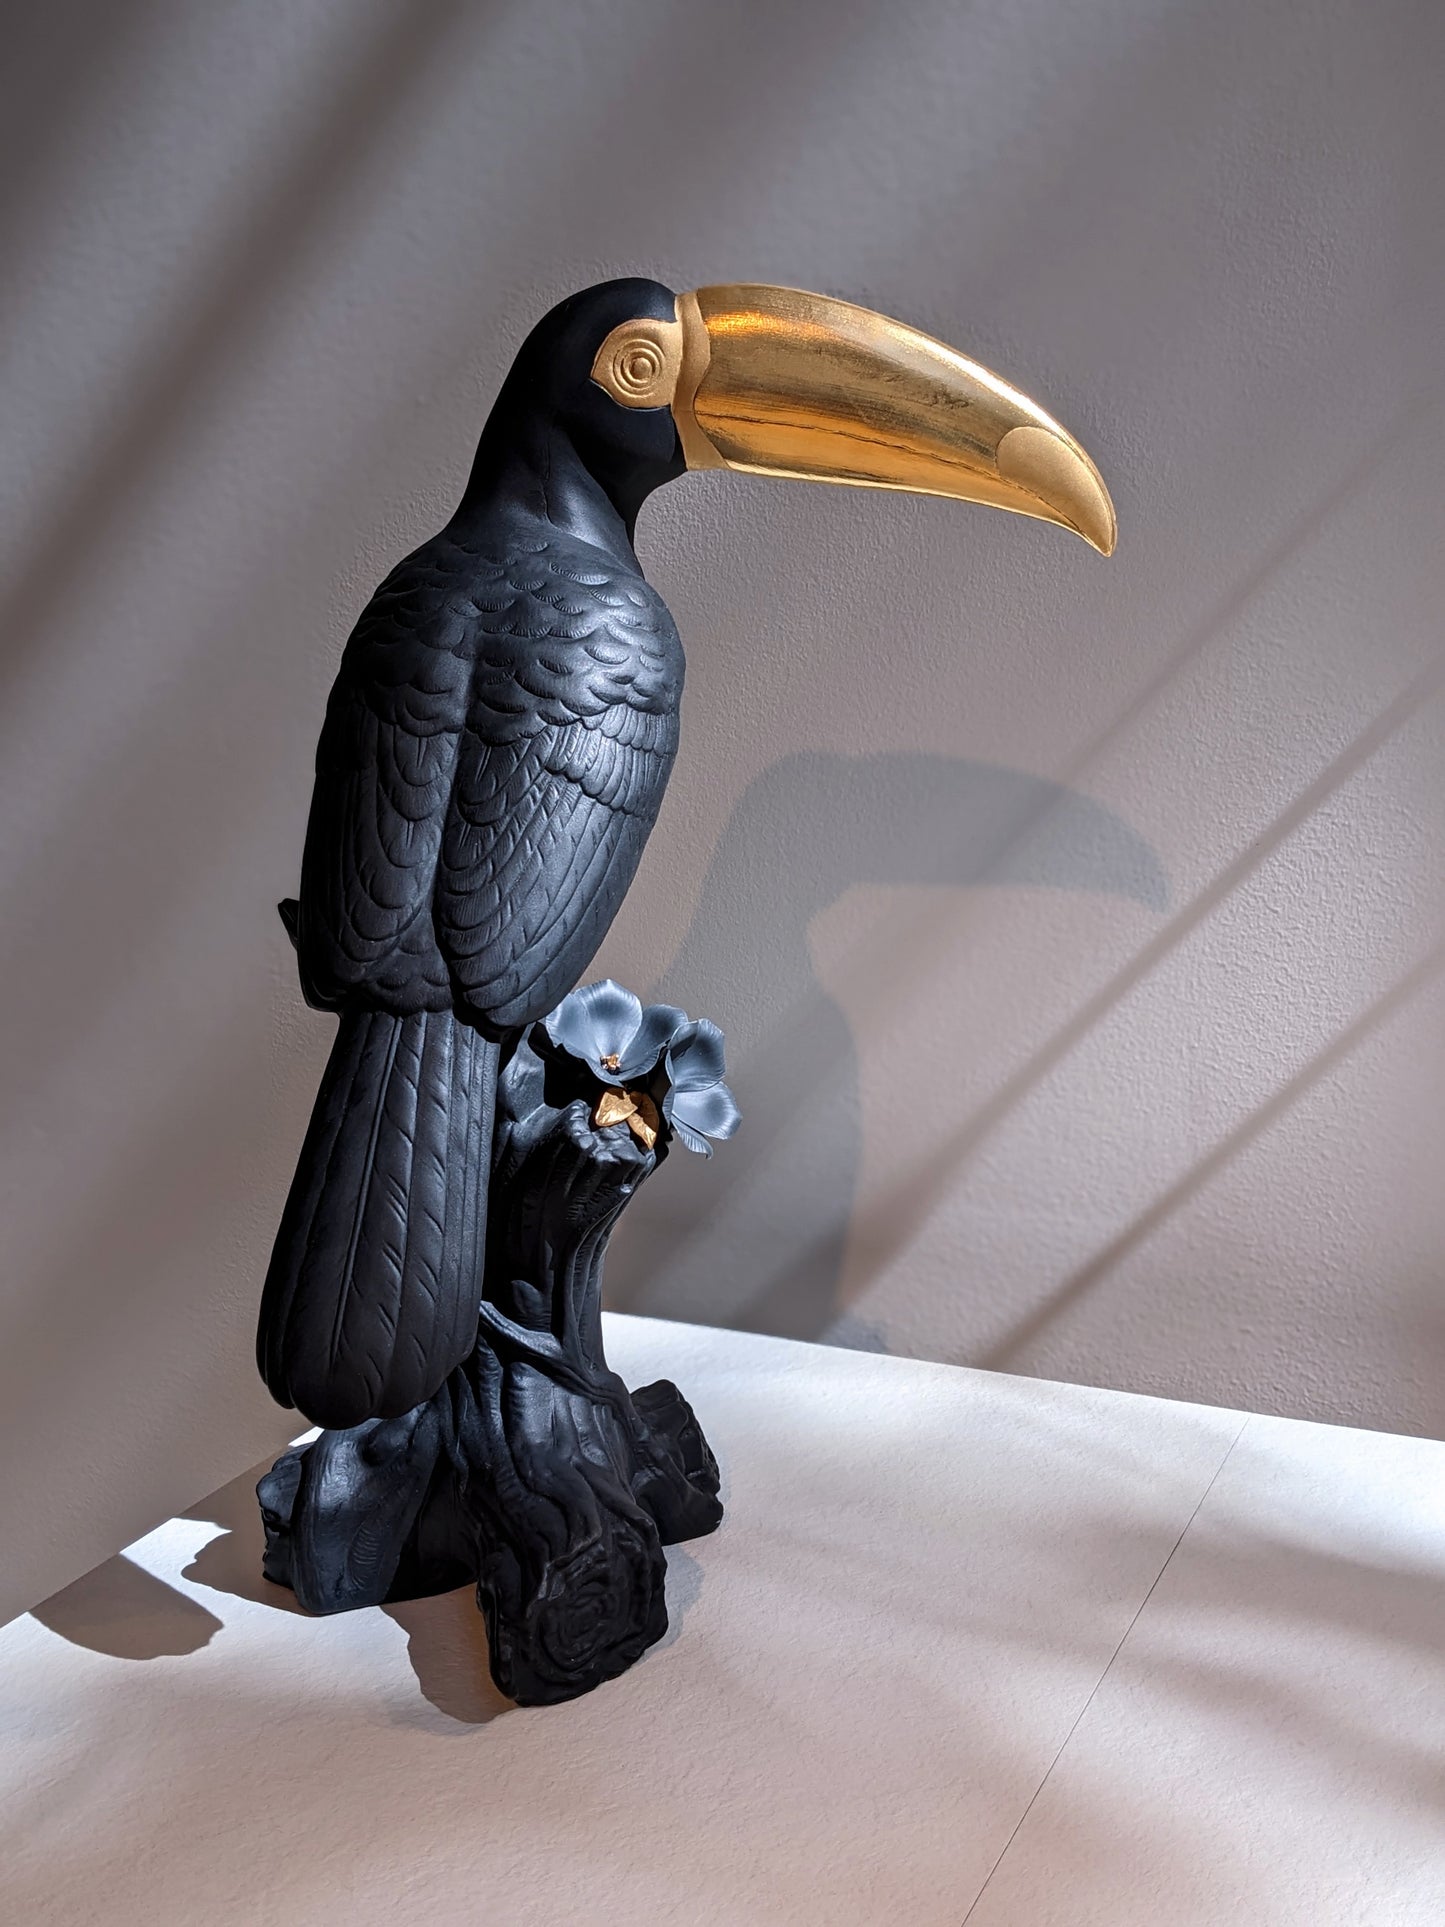 Toucan Sculpture. Black-gold. Limited Edition